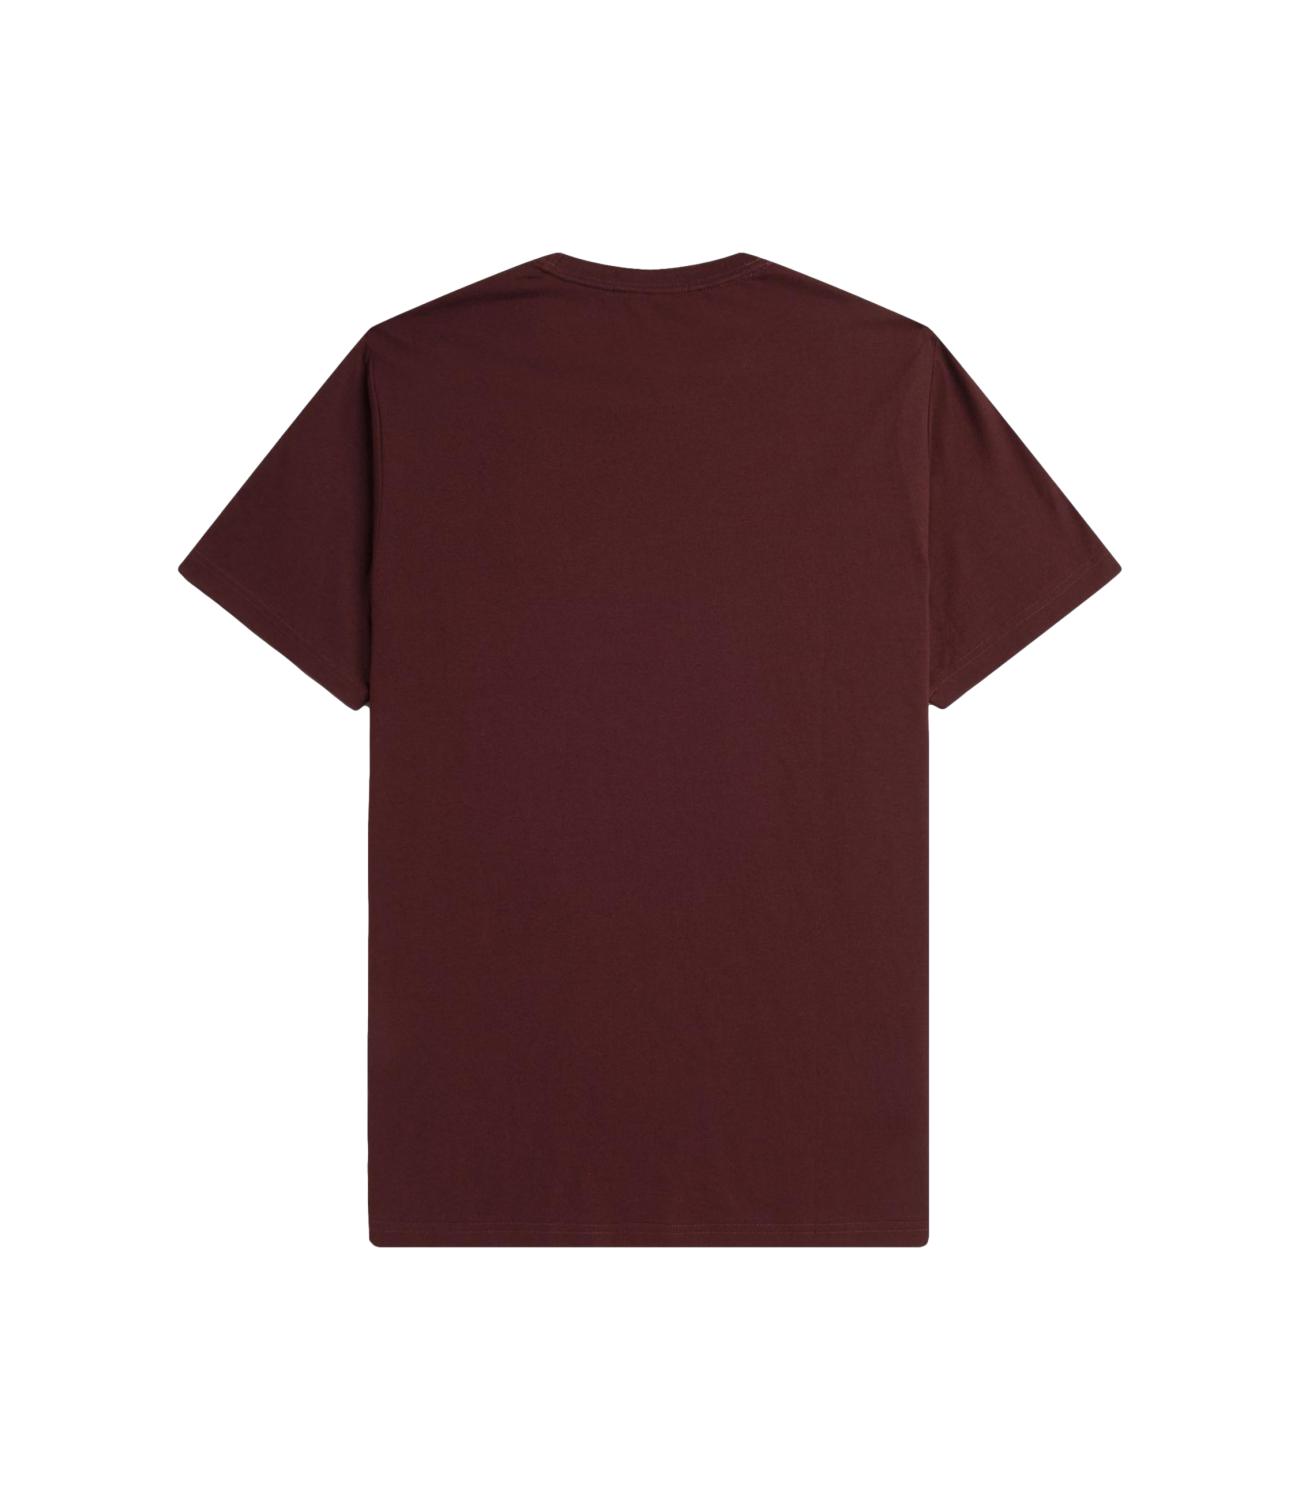 Fred Perry t-shirt bordeaux Crew neck